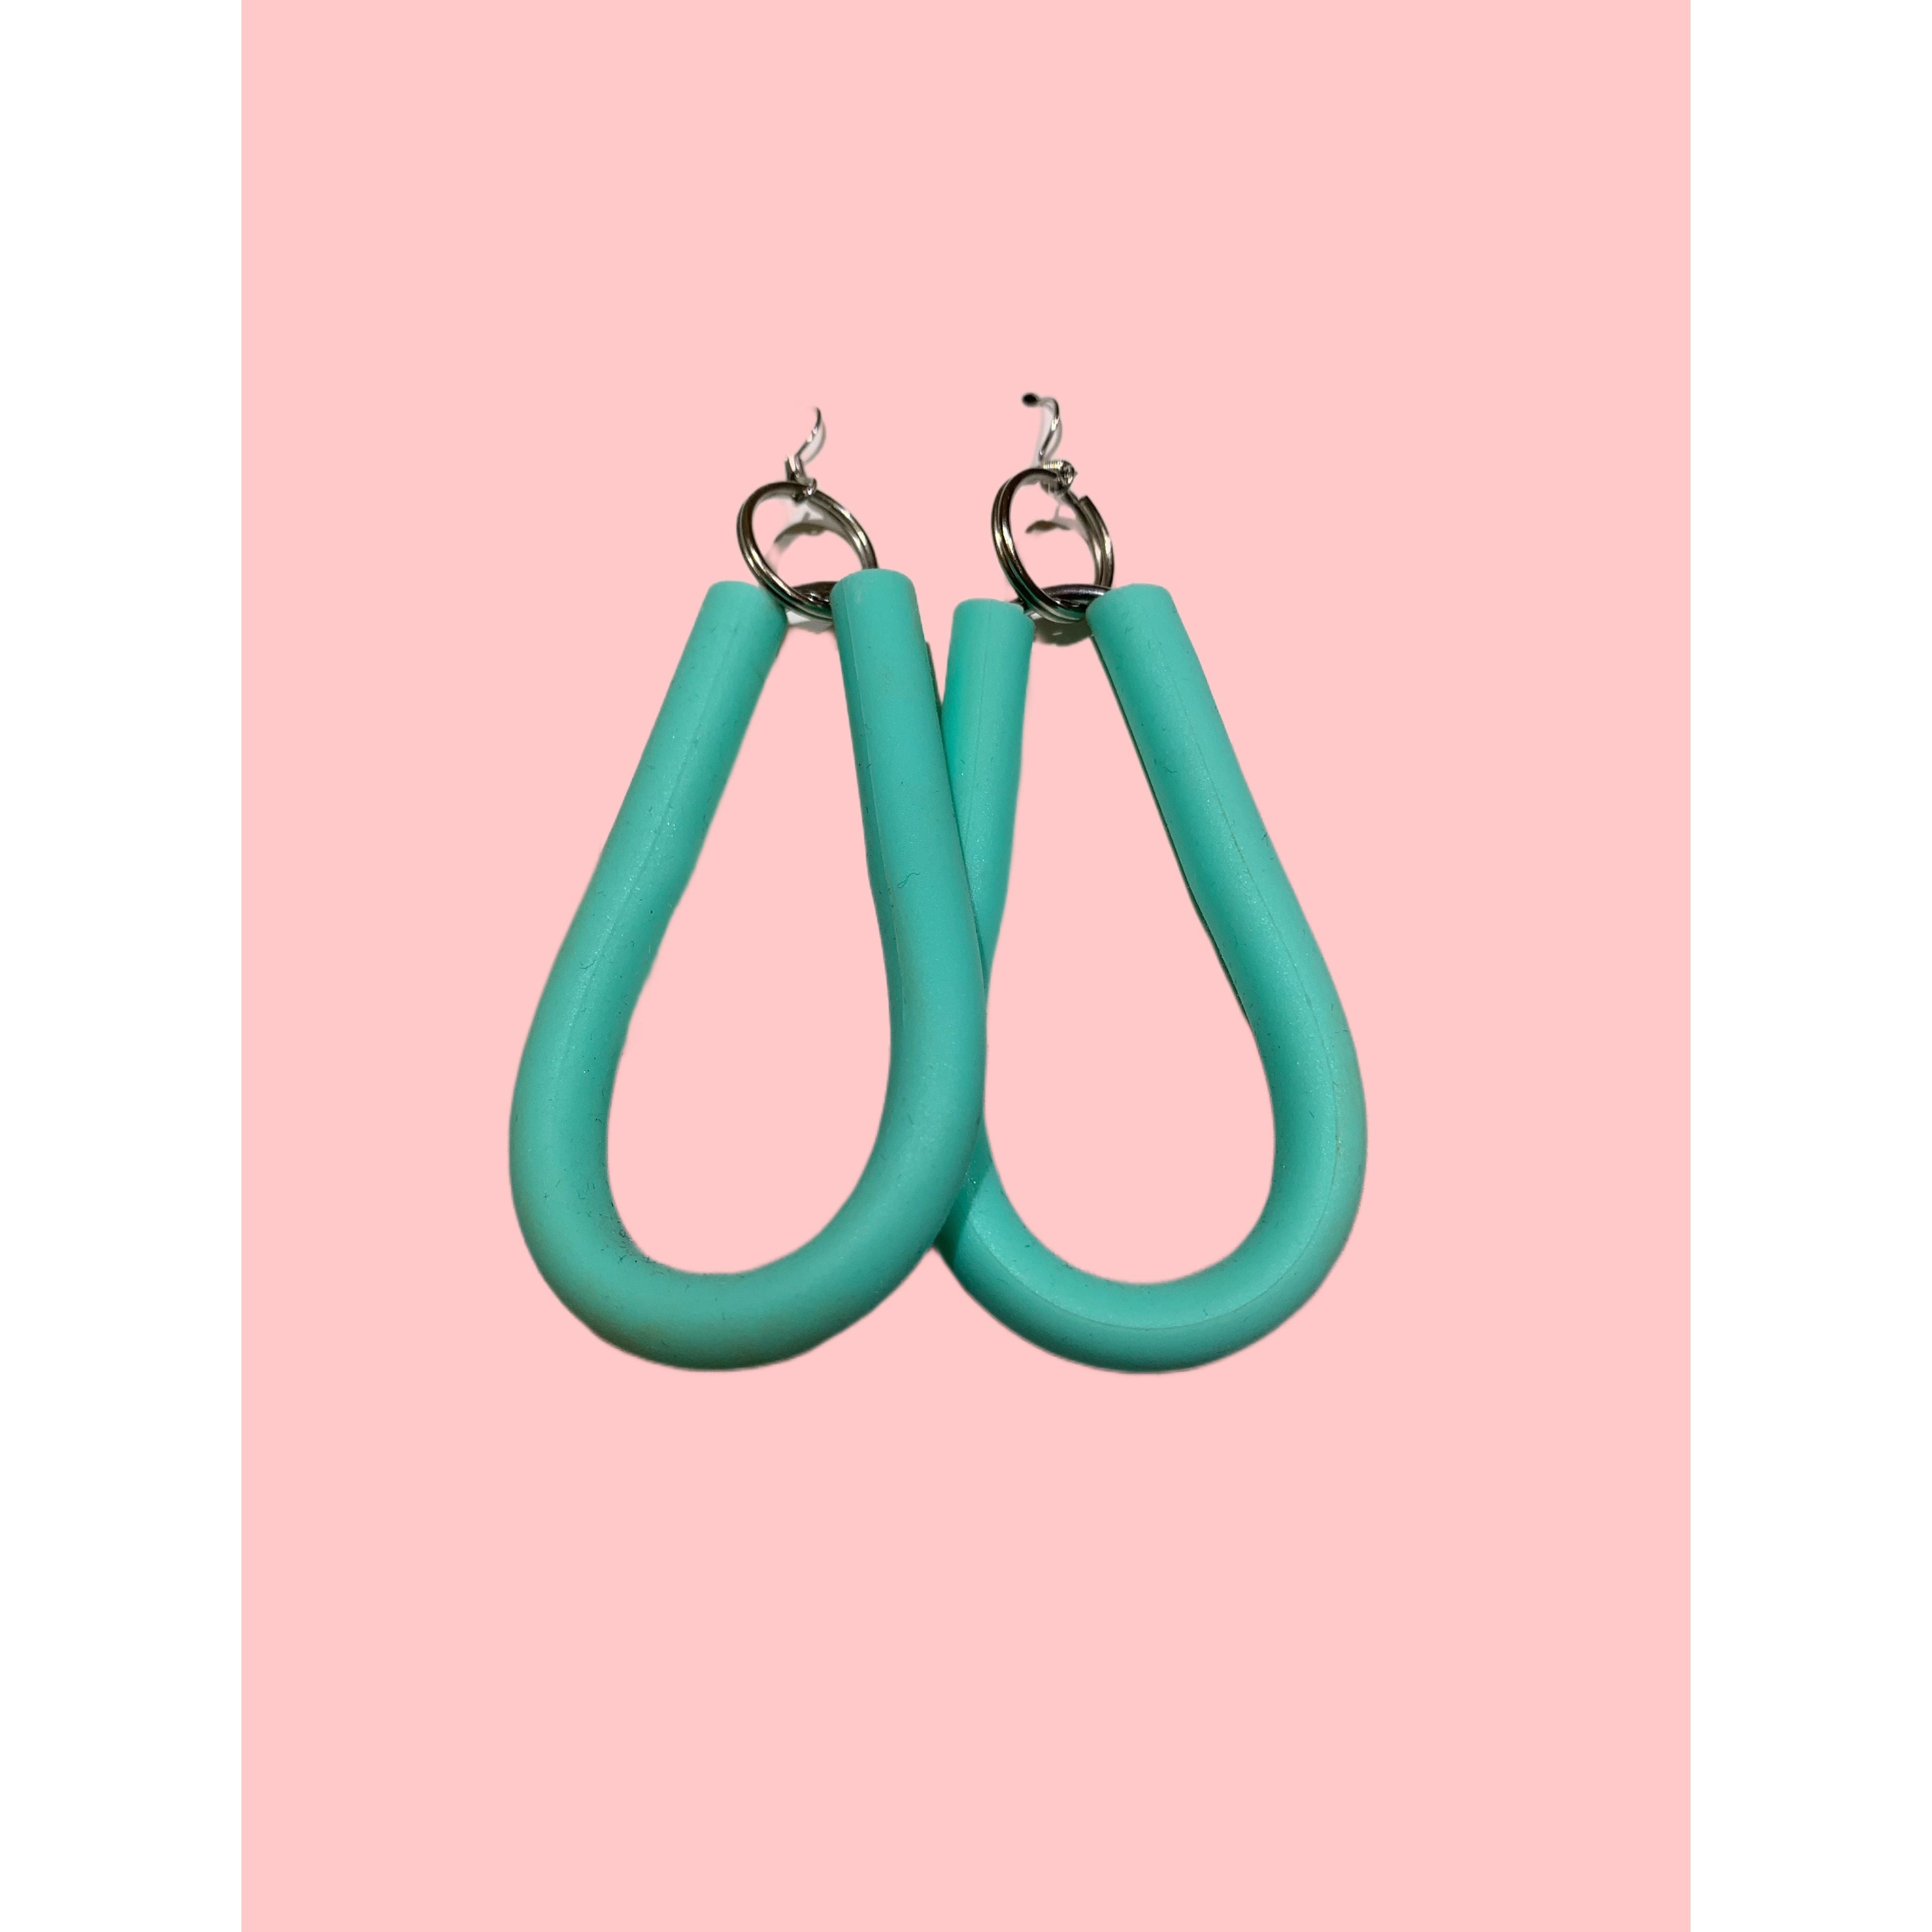 Silicone Valley Hoops + pear shaped danglers